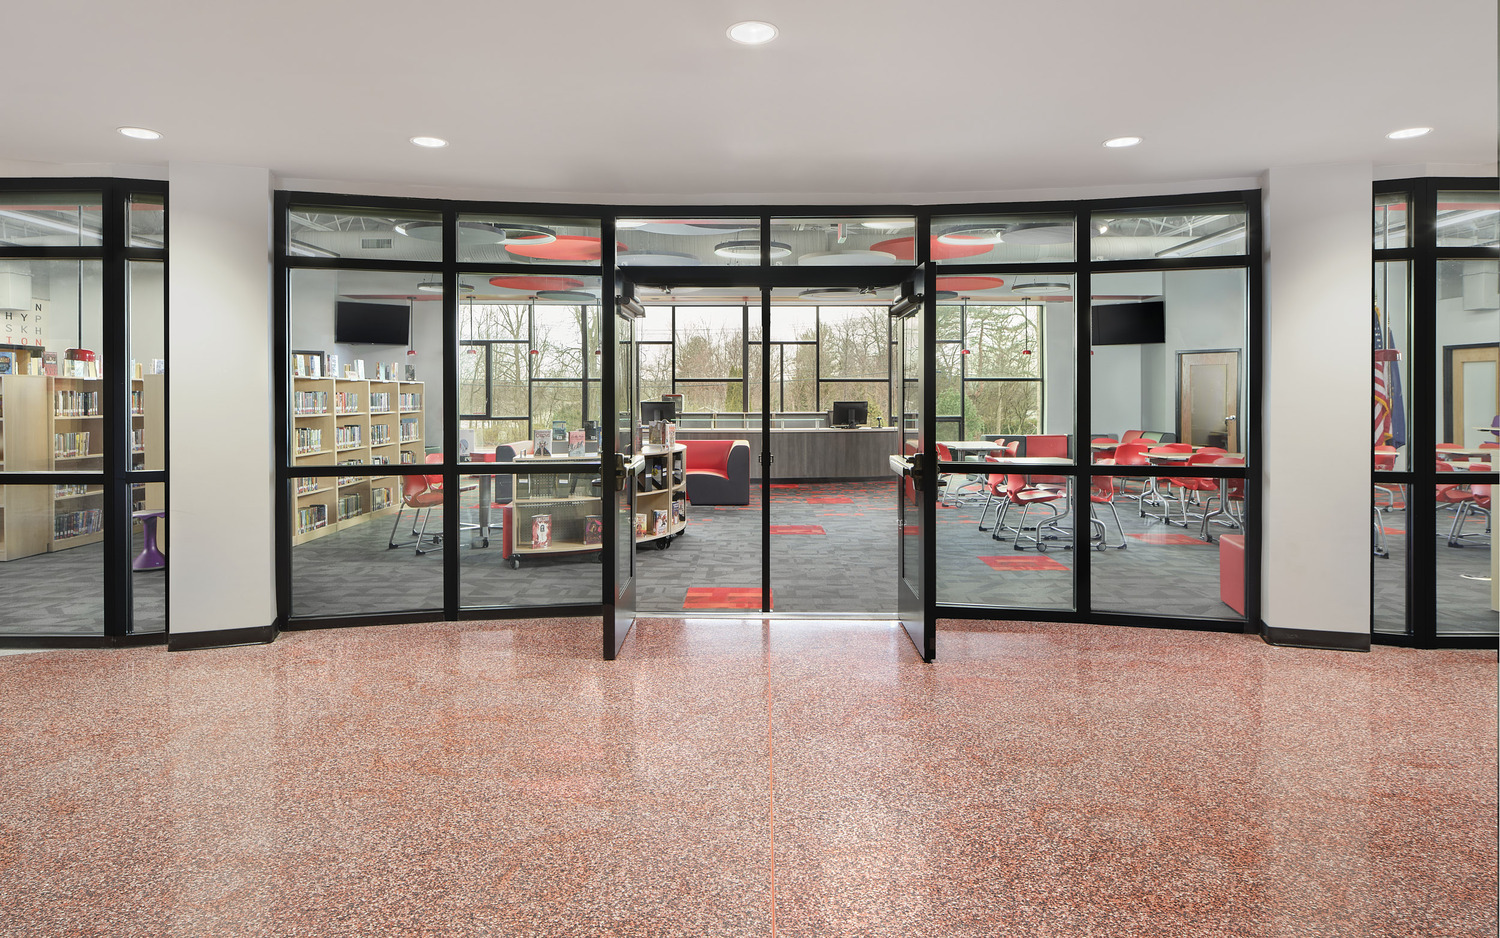 Image of open doors leading into a library